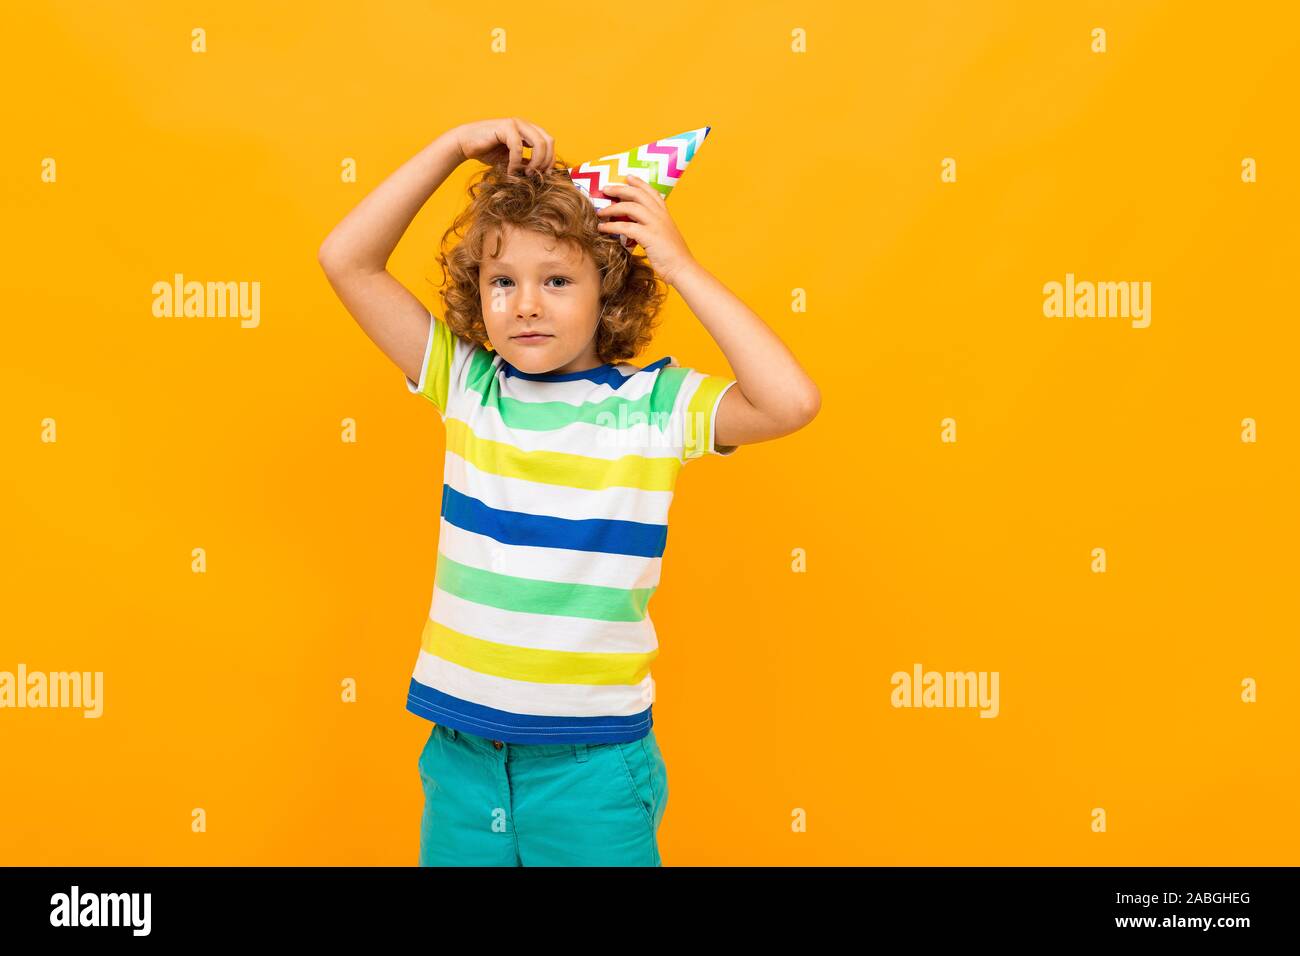 Attractive curly red-haired boy with a festive cap on a yellow background Stock Photo